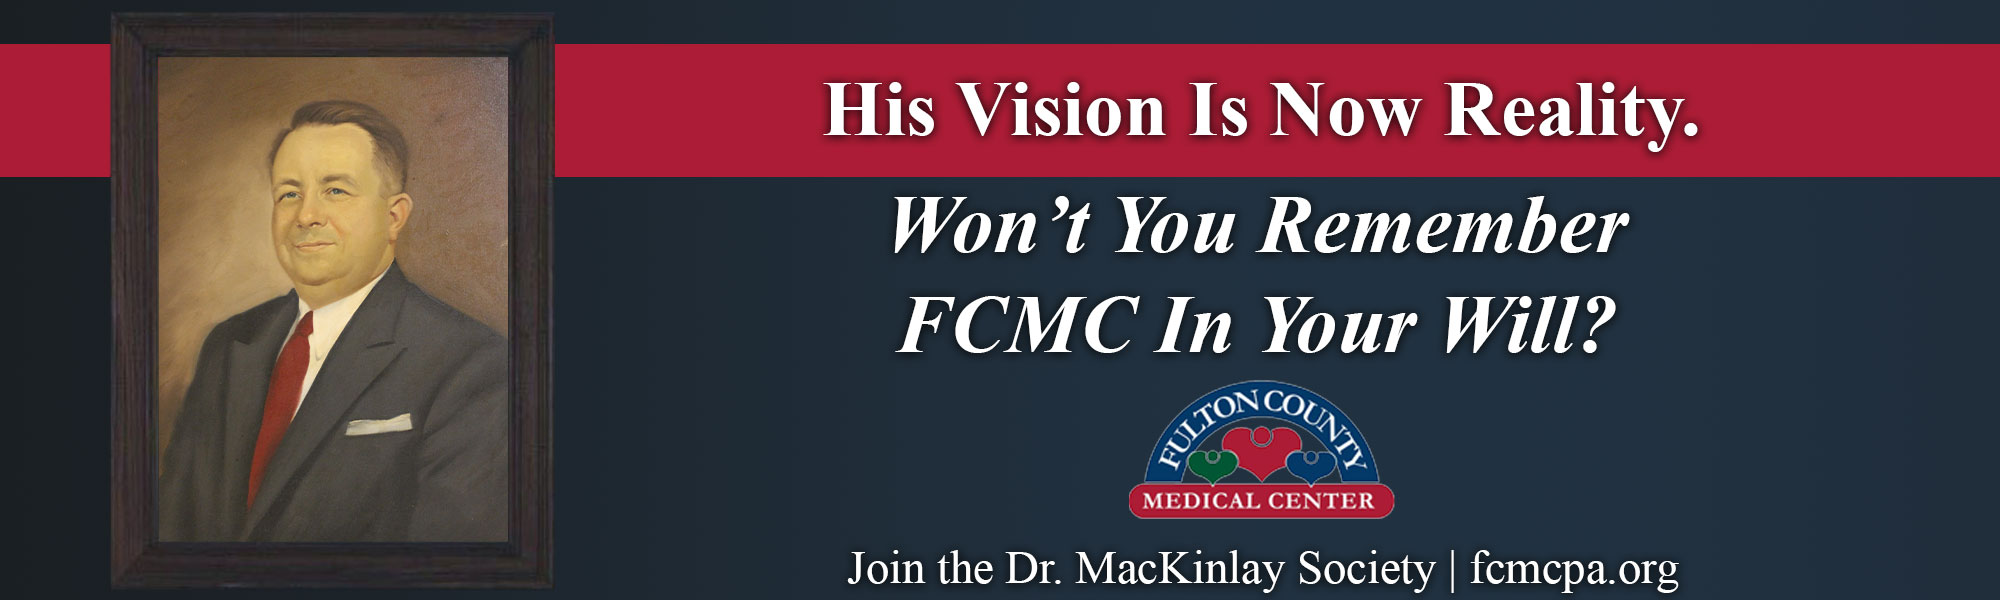 Pictured a painting of Dr. MacKinlay 

His Vision is Now Reality

Won't You Remember FCMC In Your Will?

Join the Dr. MacKinlay Society | fcmcpa.org